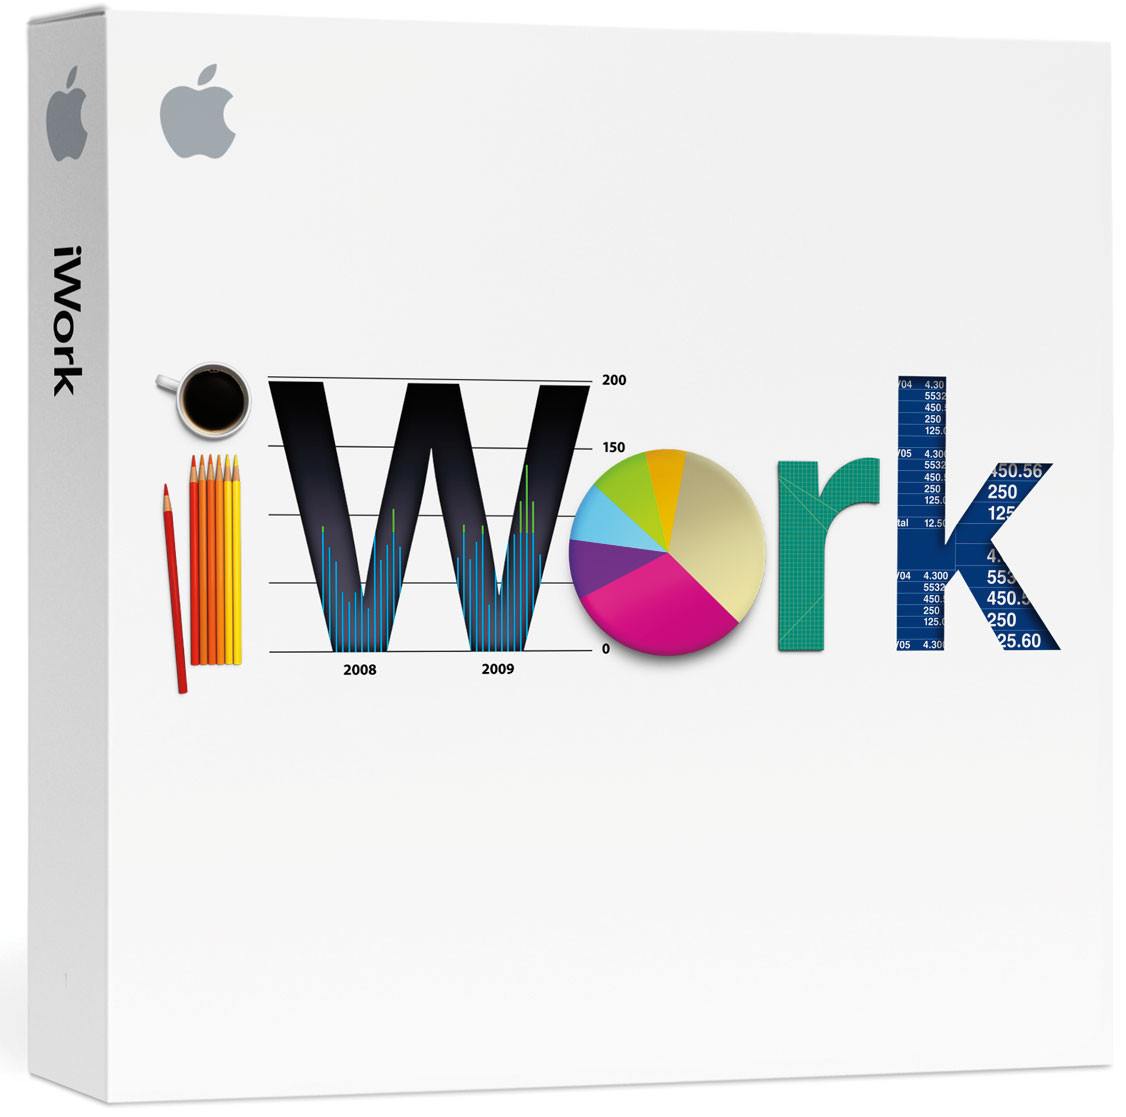 How to Download iWork For Free Even You Don’t Have a New Mac